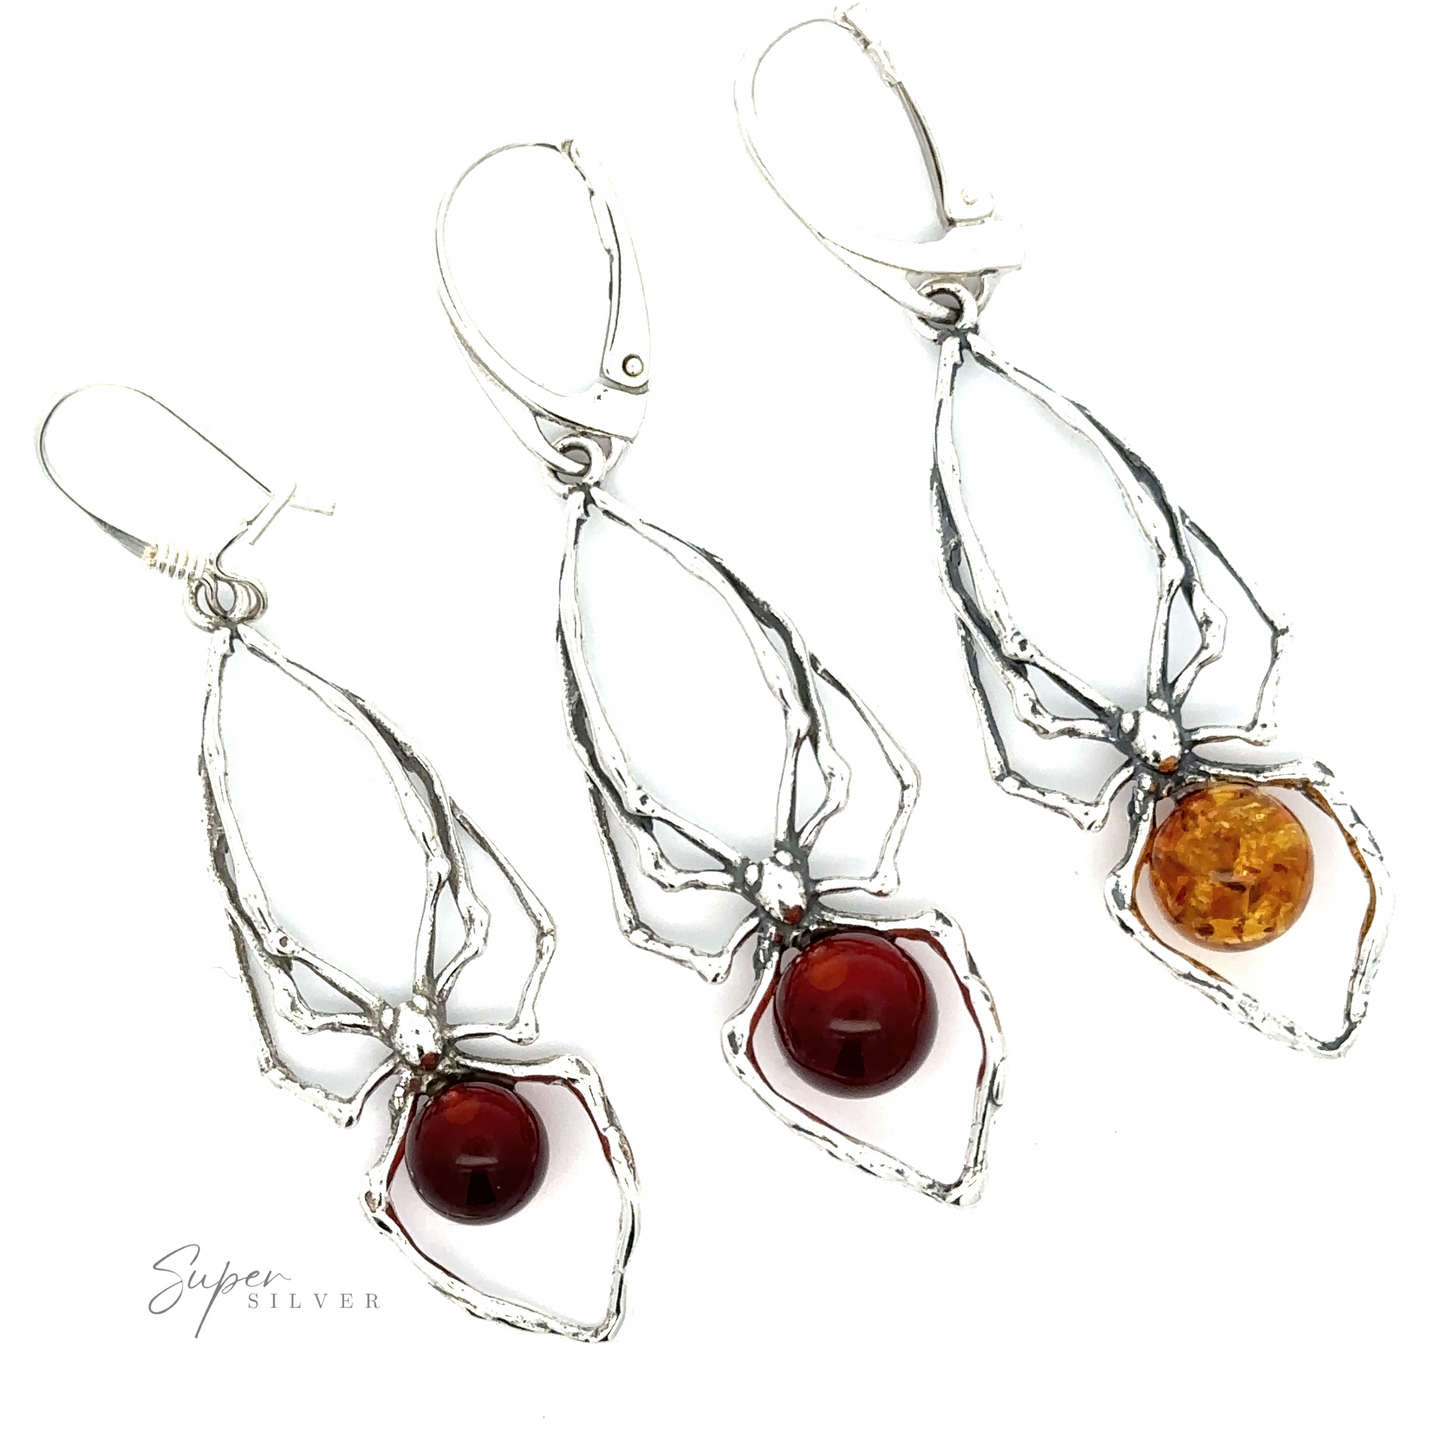 Three pairs of Beautiful Amber Spider Earrings with Baltic amber and red gemstone accents, symbolizing self-empowerment.